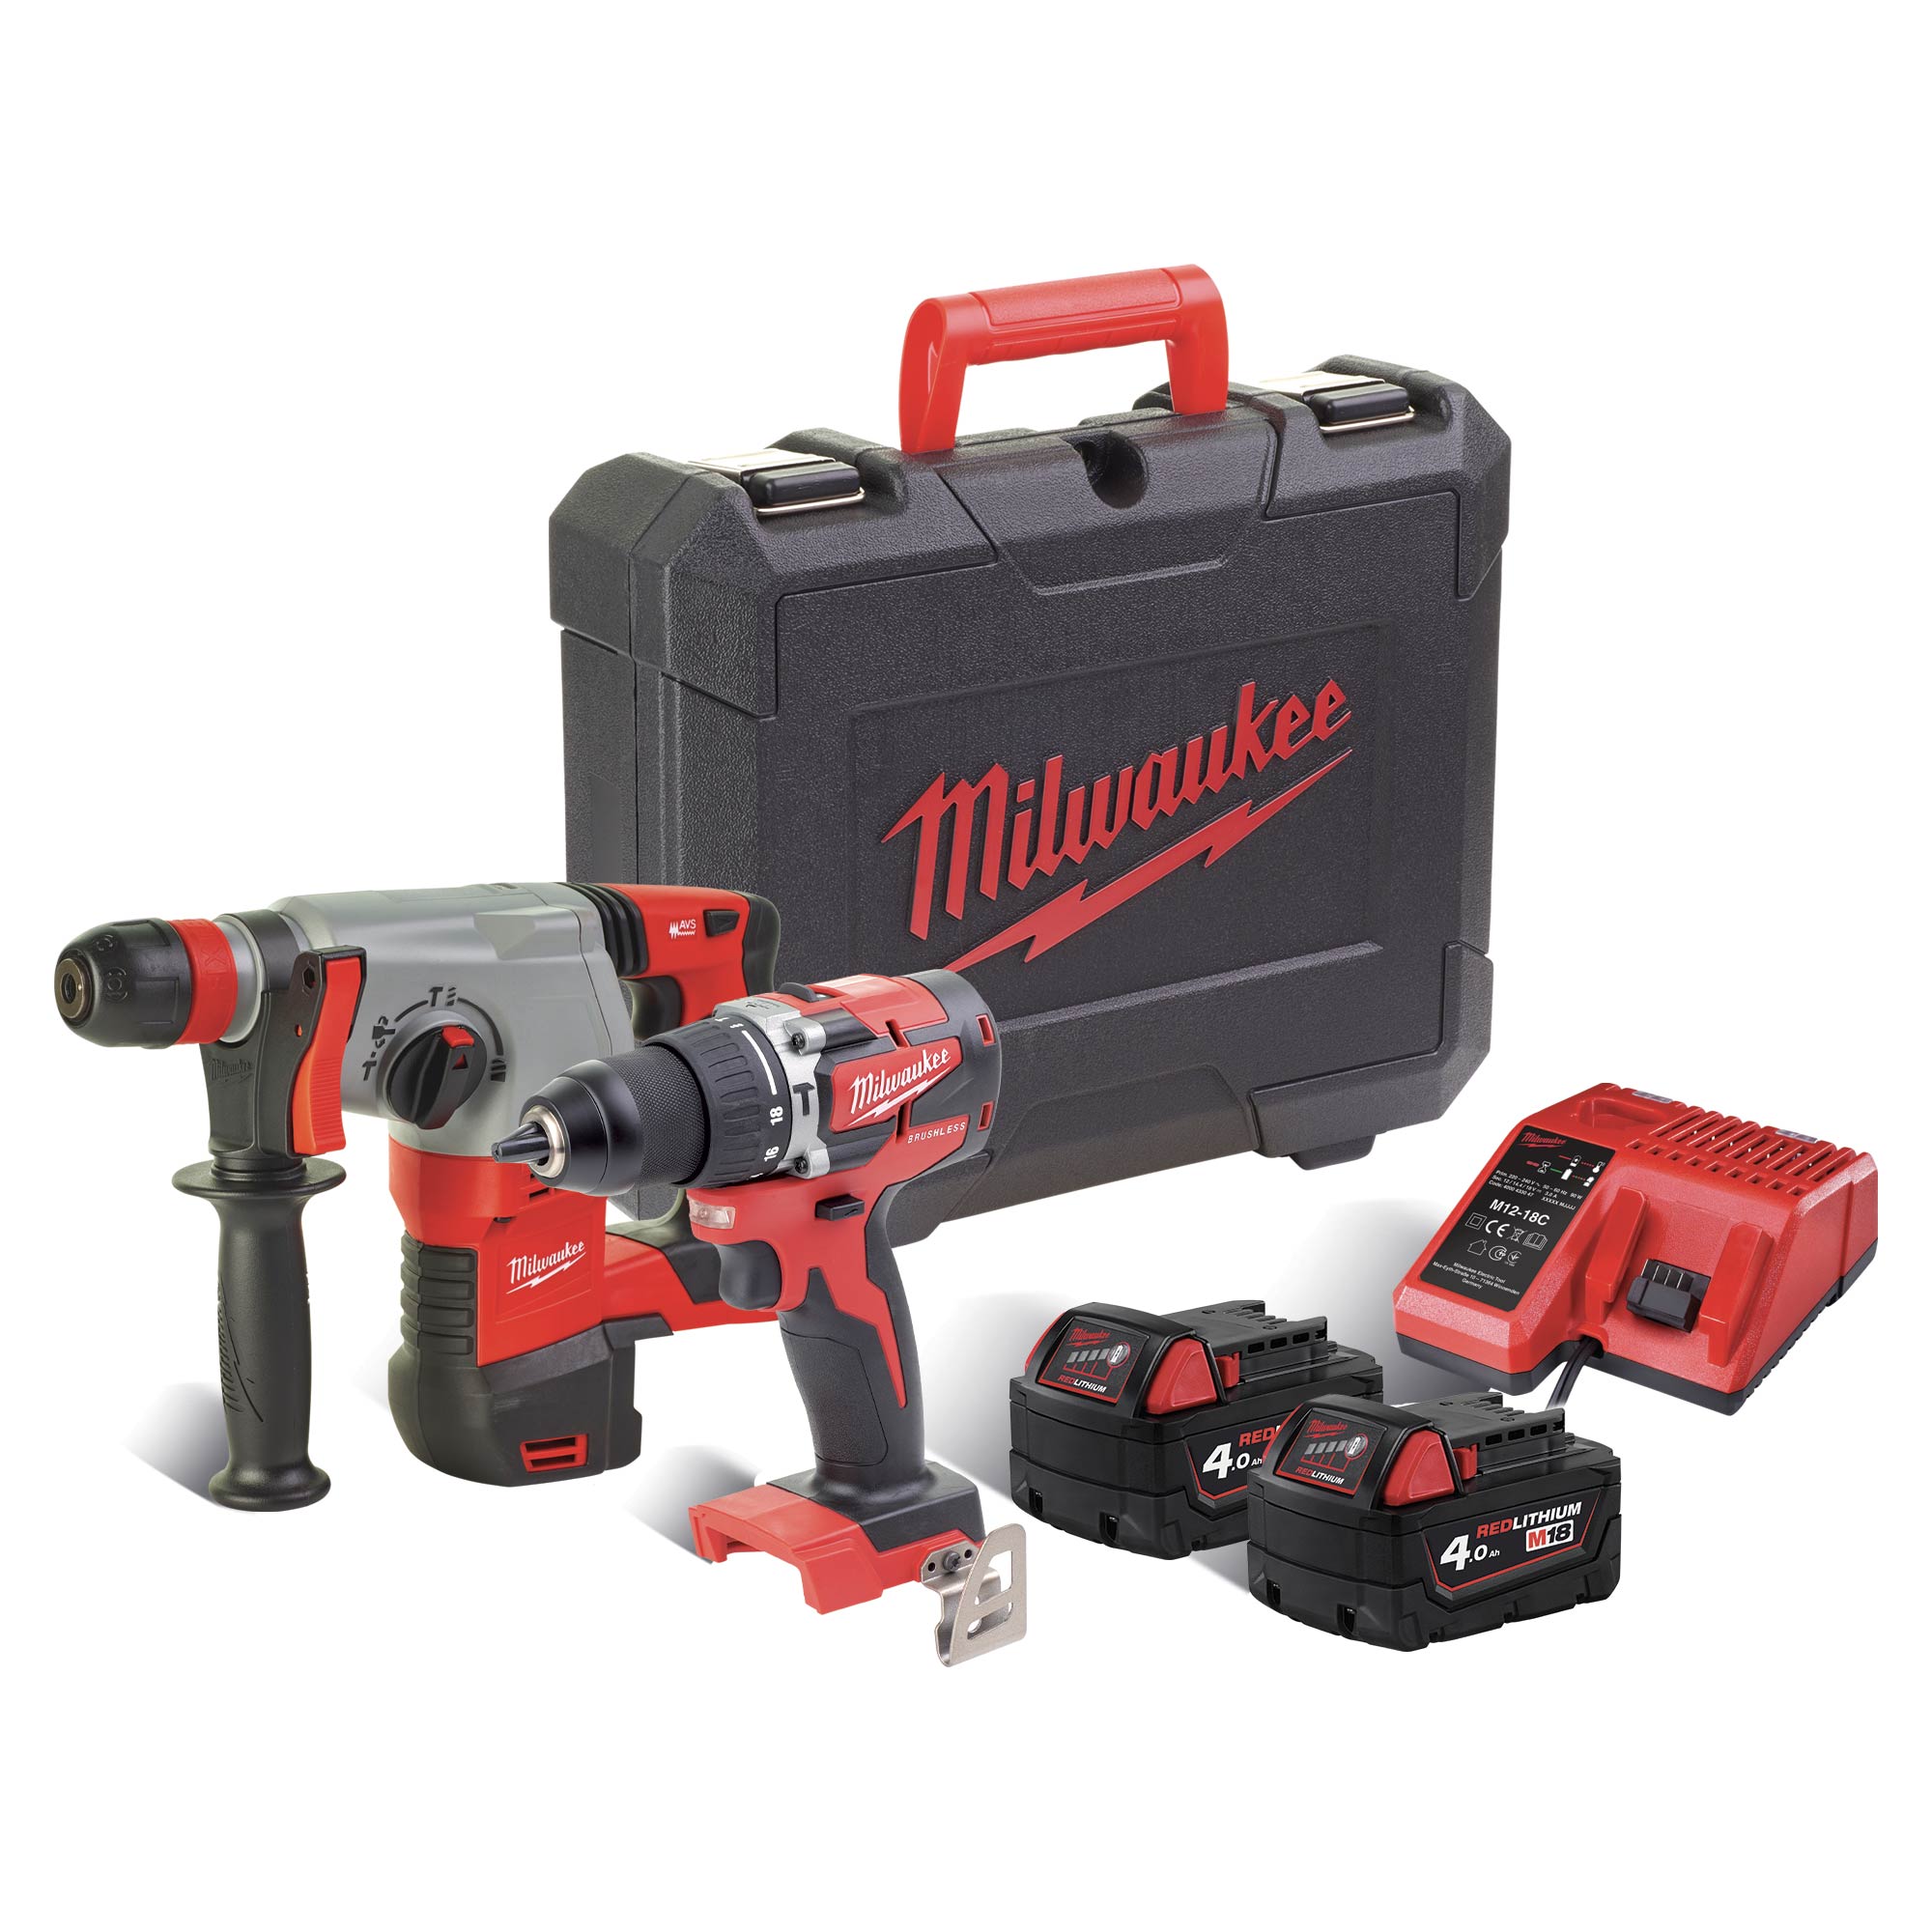 Pack 2 outils Perceuse + Visseuse MILWAUKEE M18 CBLPP2A-402C Compact  Brushless Powerpack